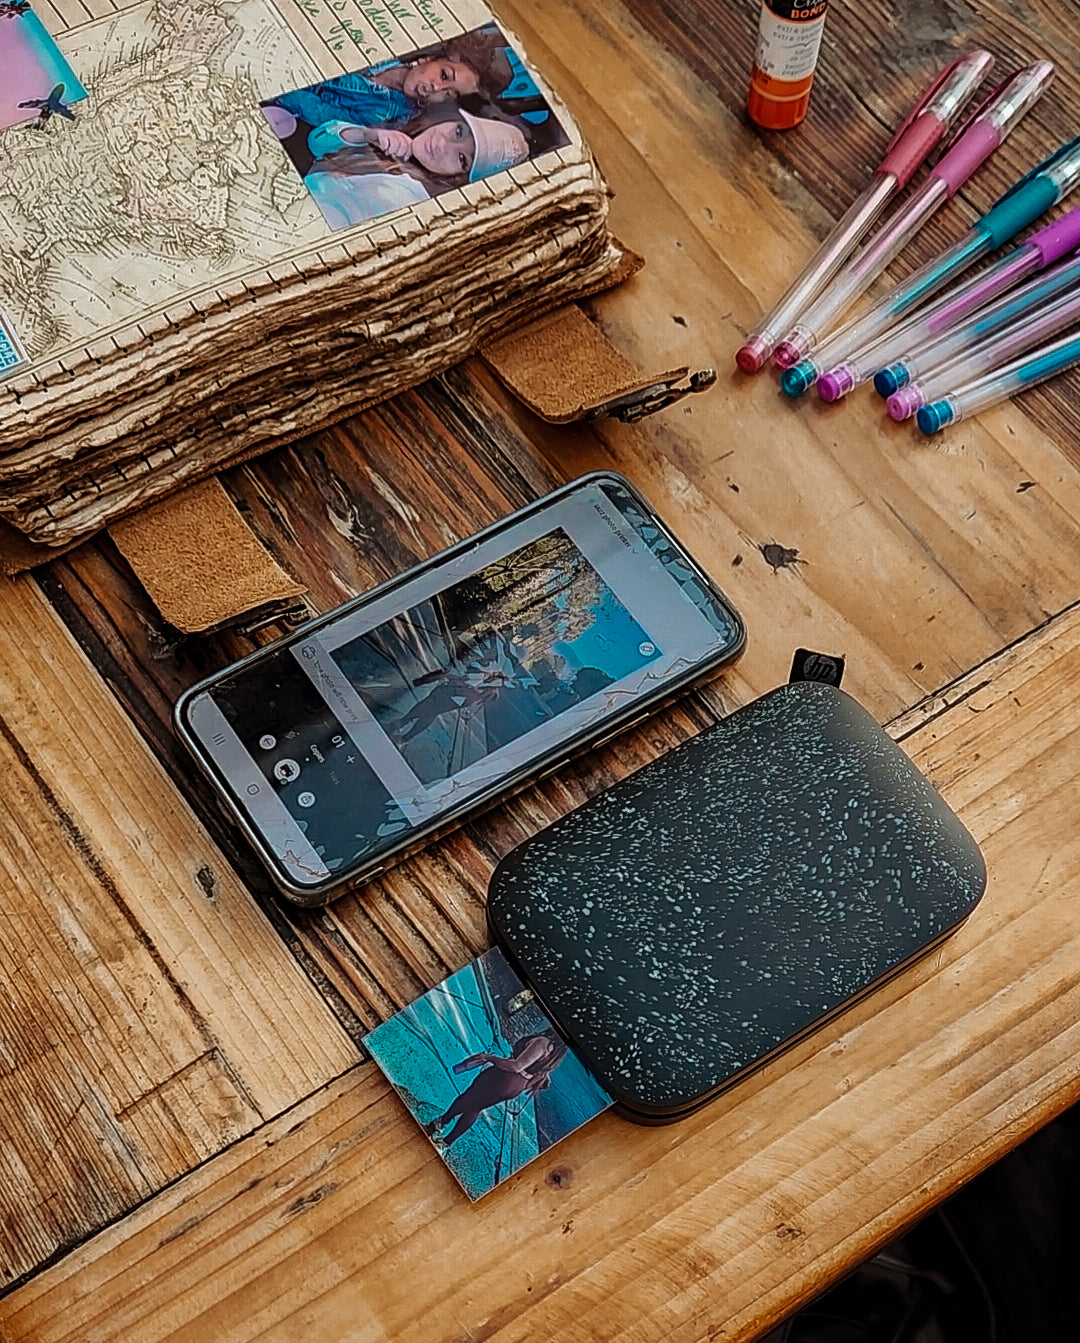 Portable Photo Printer for leather journal